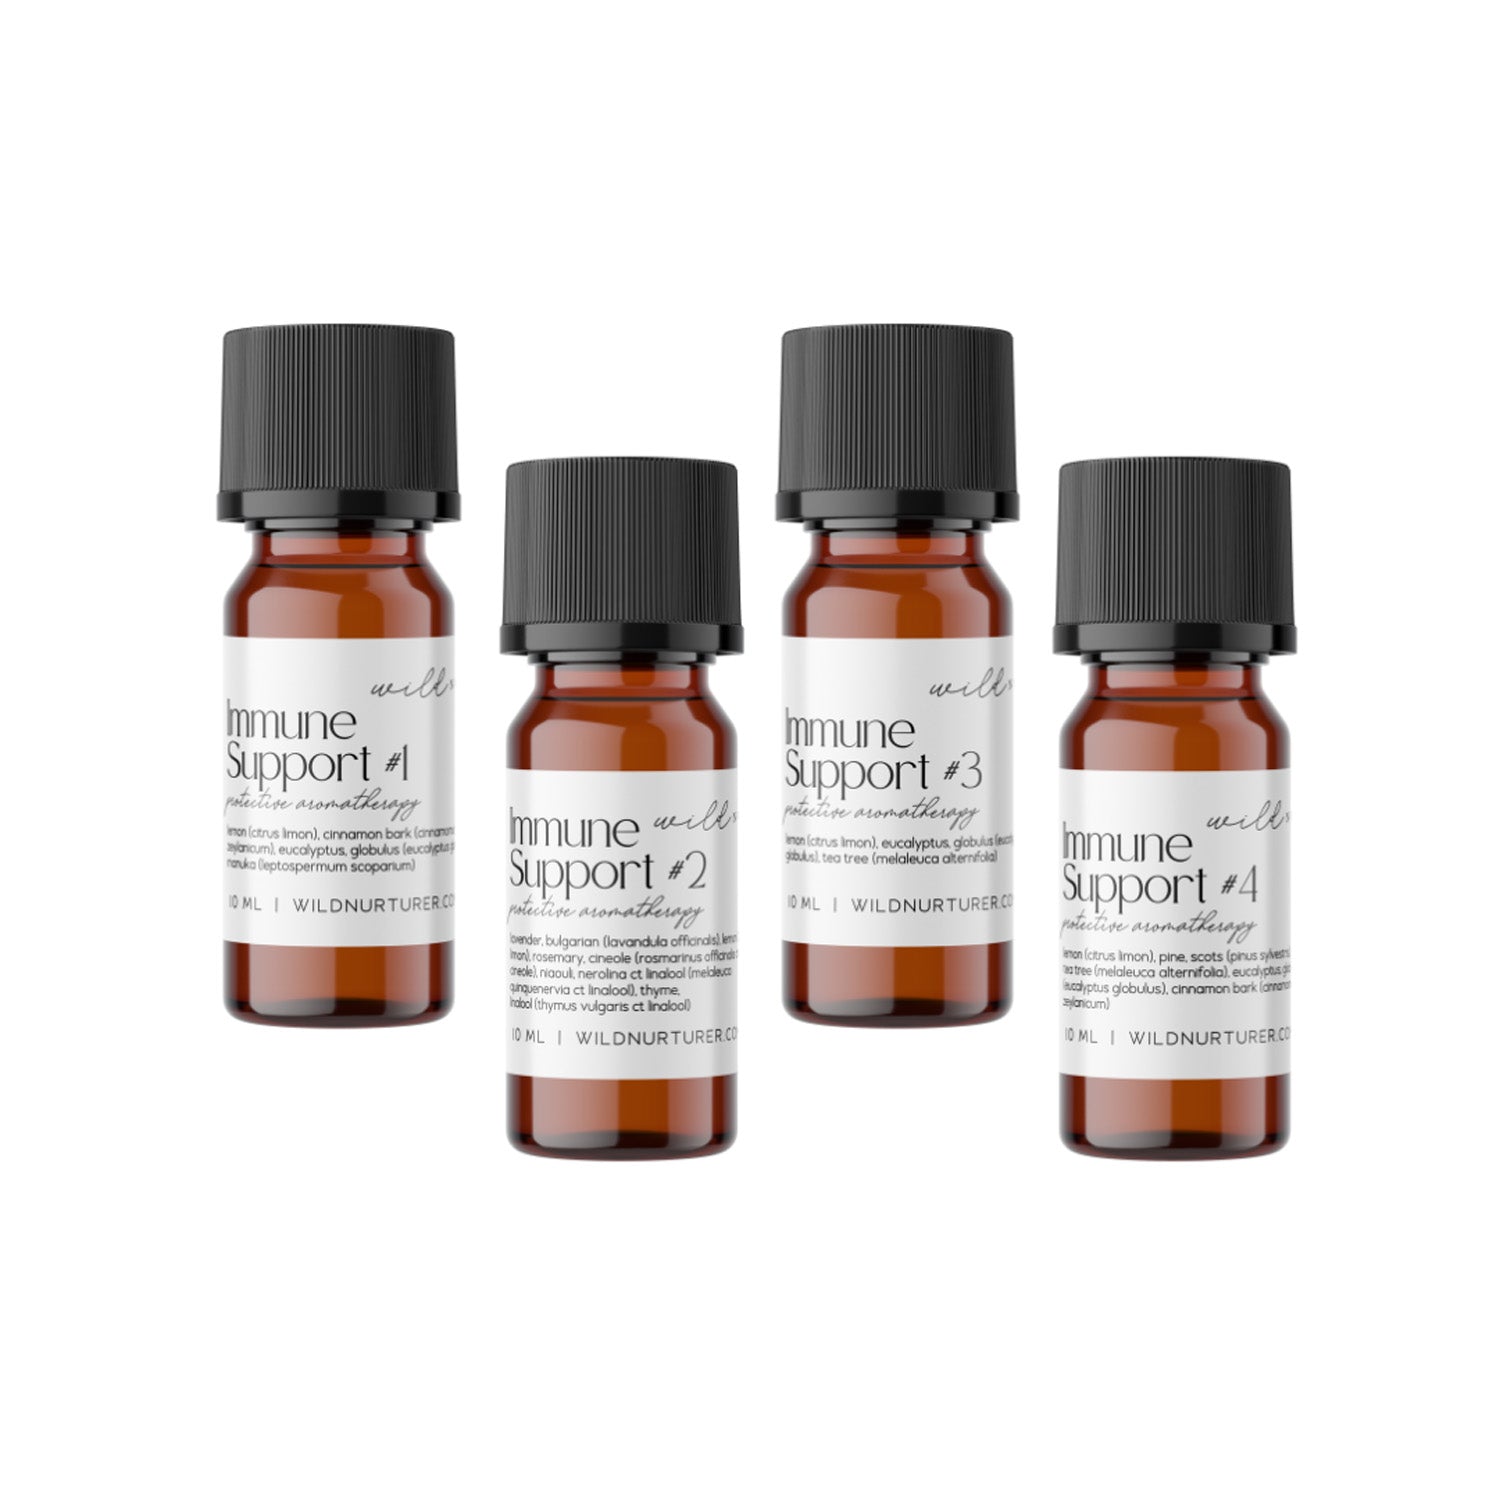 Four bottles of Wild Nurturer Aromatherapy's Immune Support Collection, labeled "immune support" 1 through 4, each containing 1 fl. oz of wild natural essential oil, arranged in a row on a white background.